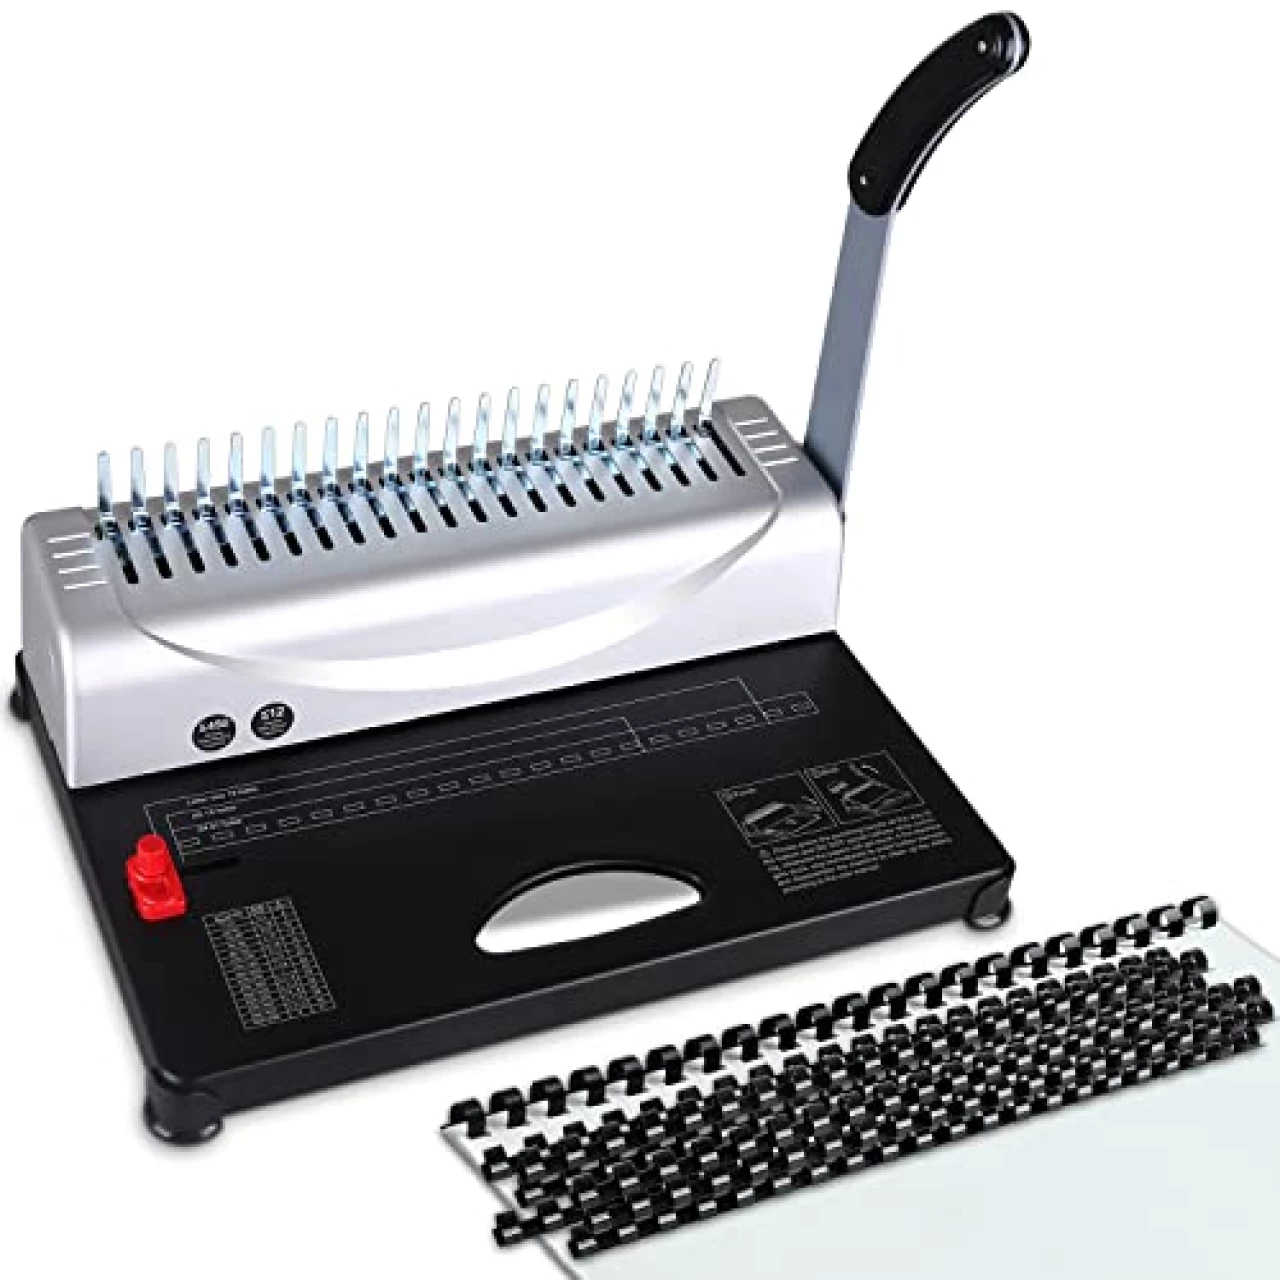 MAKEASY Binding Machine, 21-Hole, 450 Sheets, Book Binding Machines with 100PCS 3/8&rsquo;&rsquo; Comb Bindings Spines, Comb Binding Machine for Letter Size, A4, A5 or Smaller Sizes